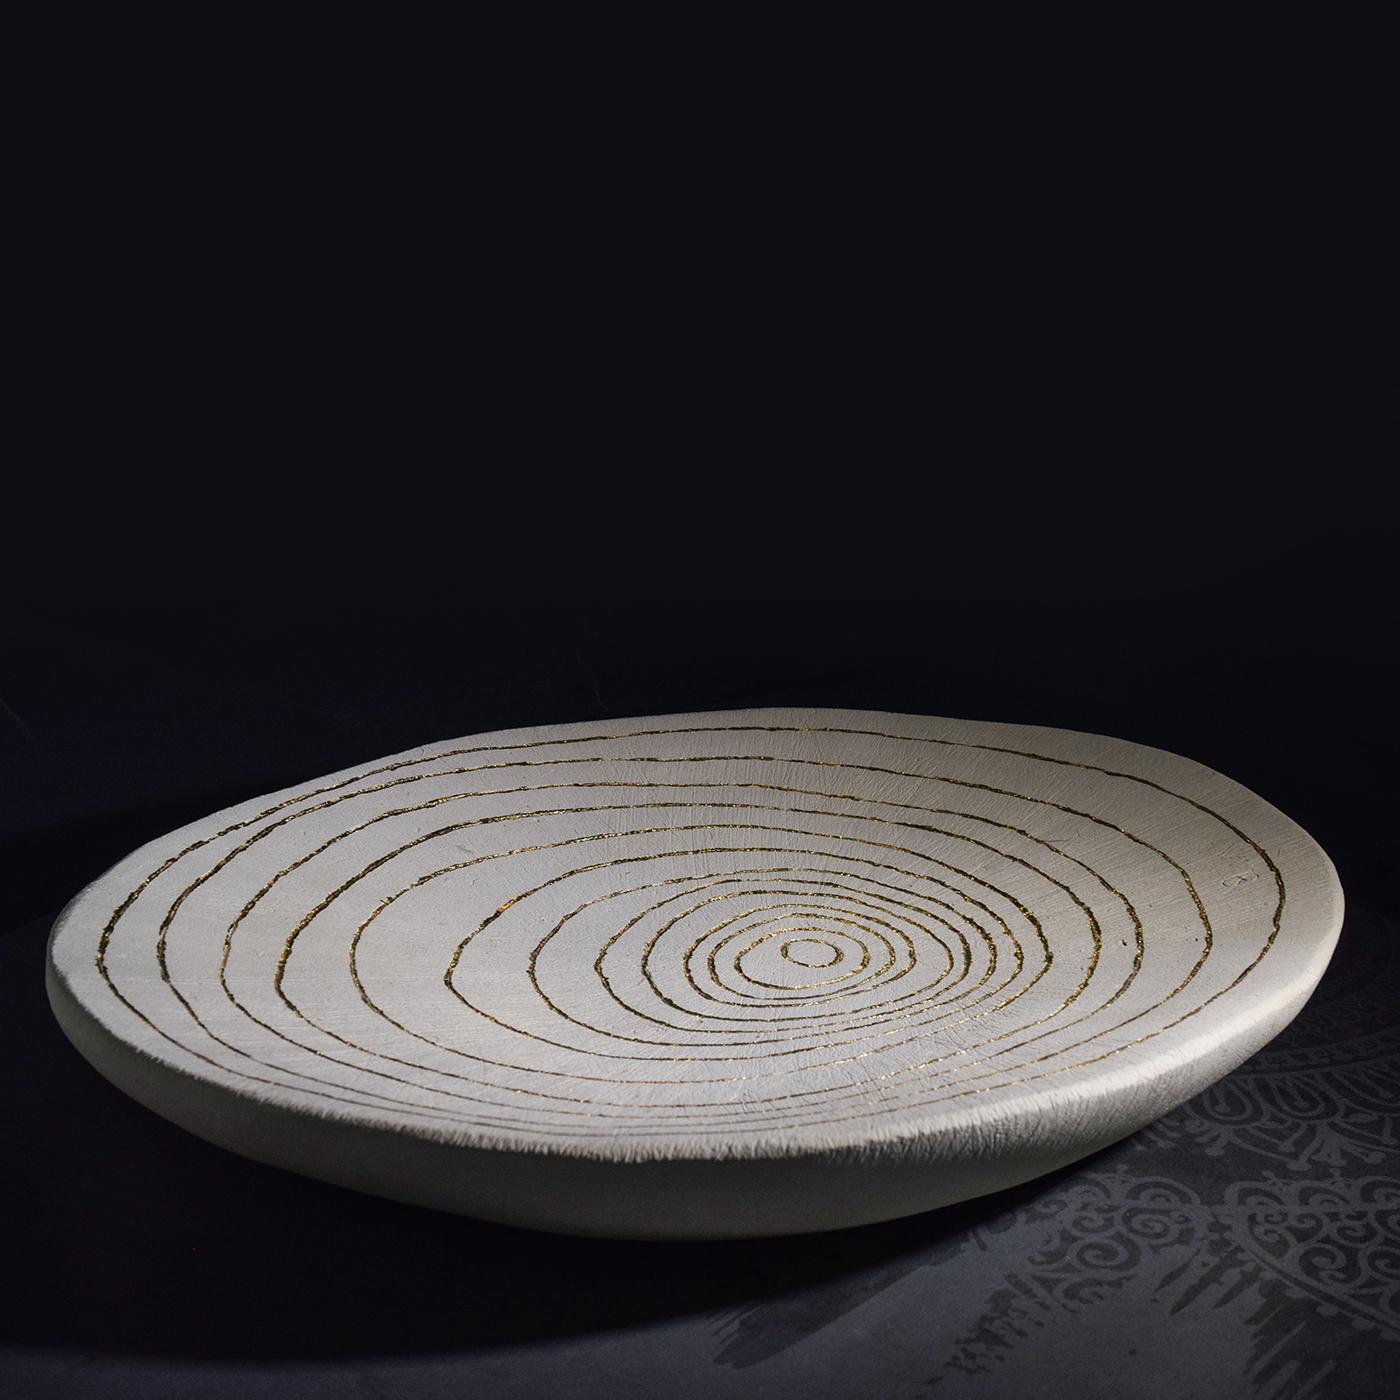 This superb bowl from the Flora Collection is crafted of Lecce stone with a shallow shape and boasts an engraved, concentric circle design enriched with gold leaf. Exclusively handmade, this piece is distinguished by its unique material, a type of